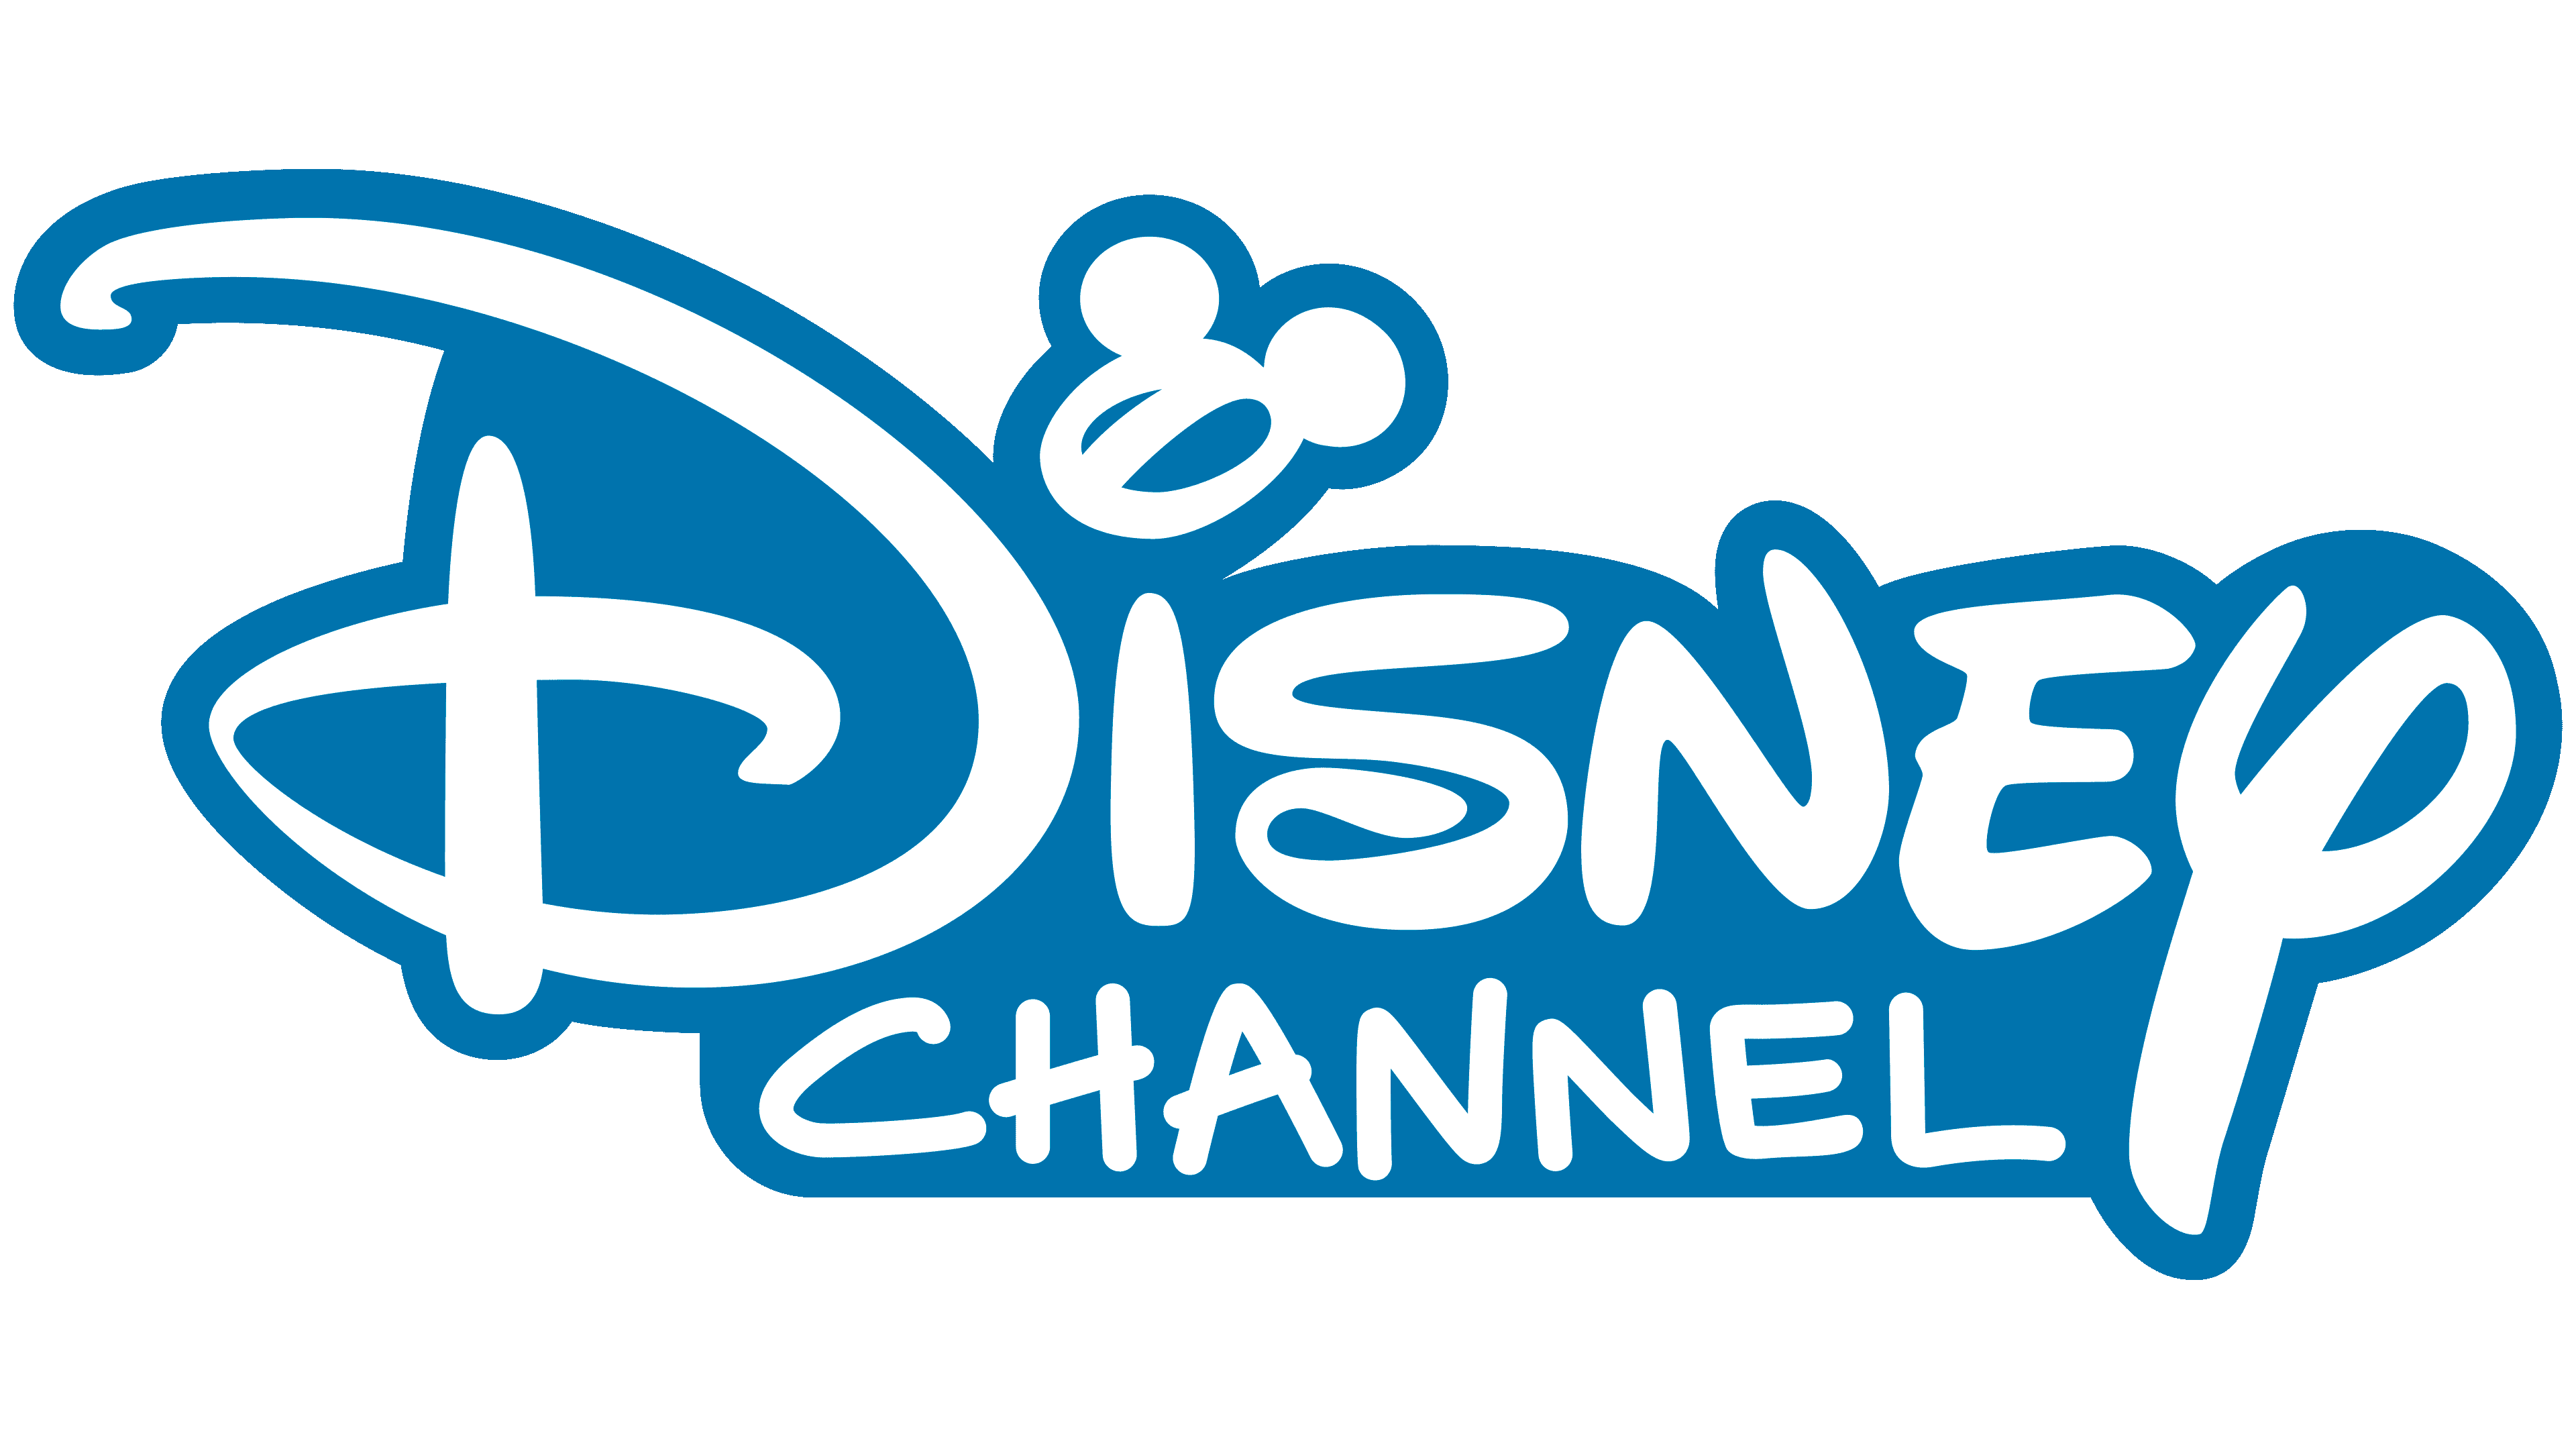 Disney Channel Logo PNG Picture